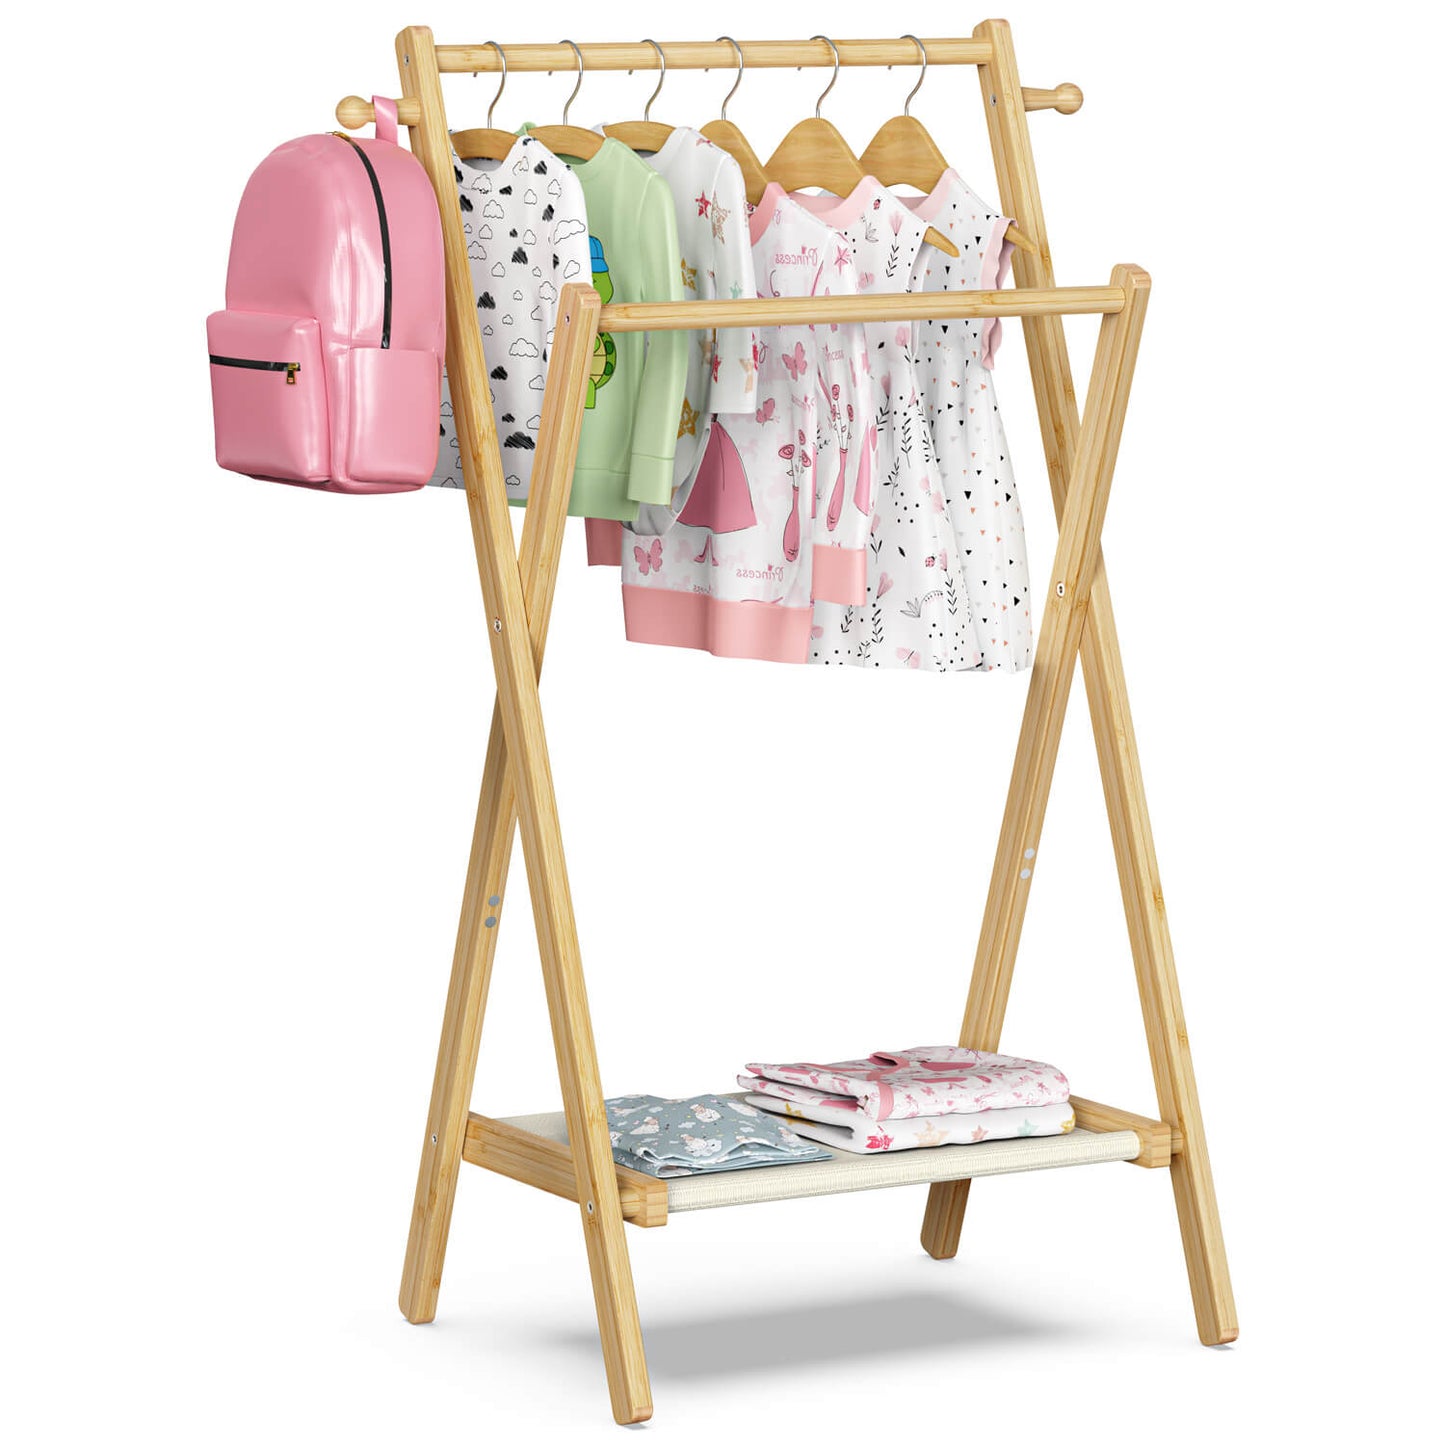 21.6''W Freestanding Bamboo Clothes Rack with Shelves, Garment Rack for Bedroom